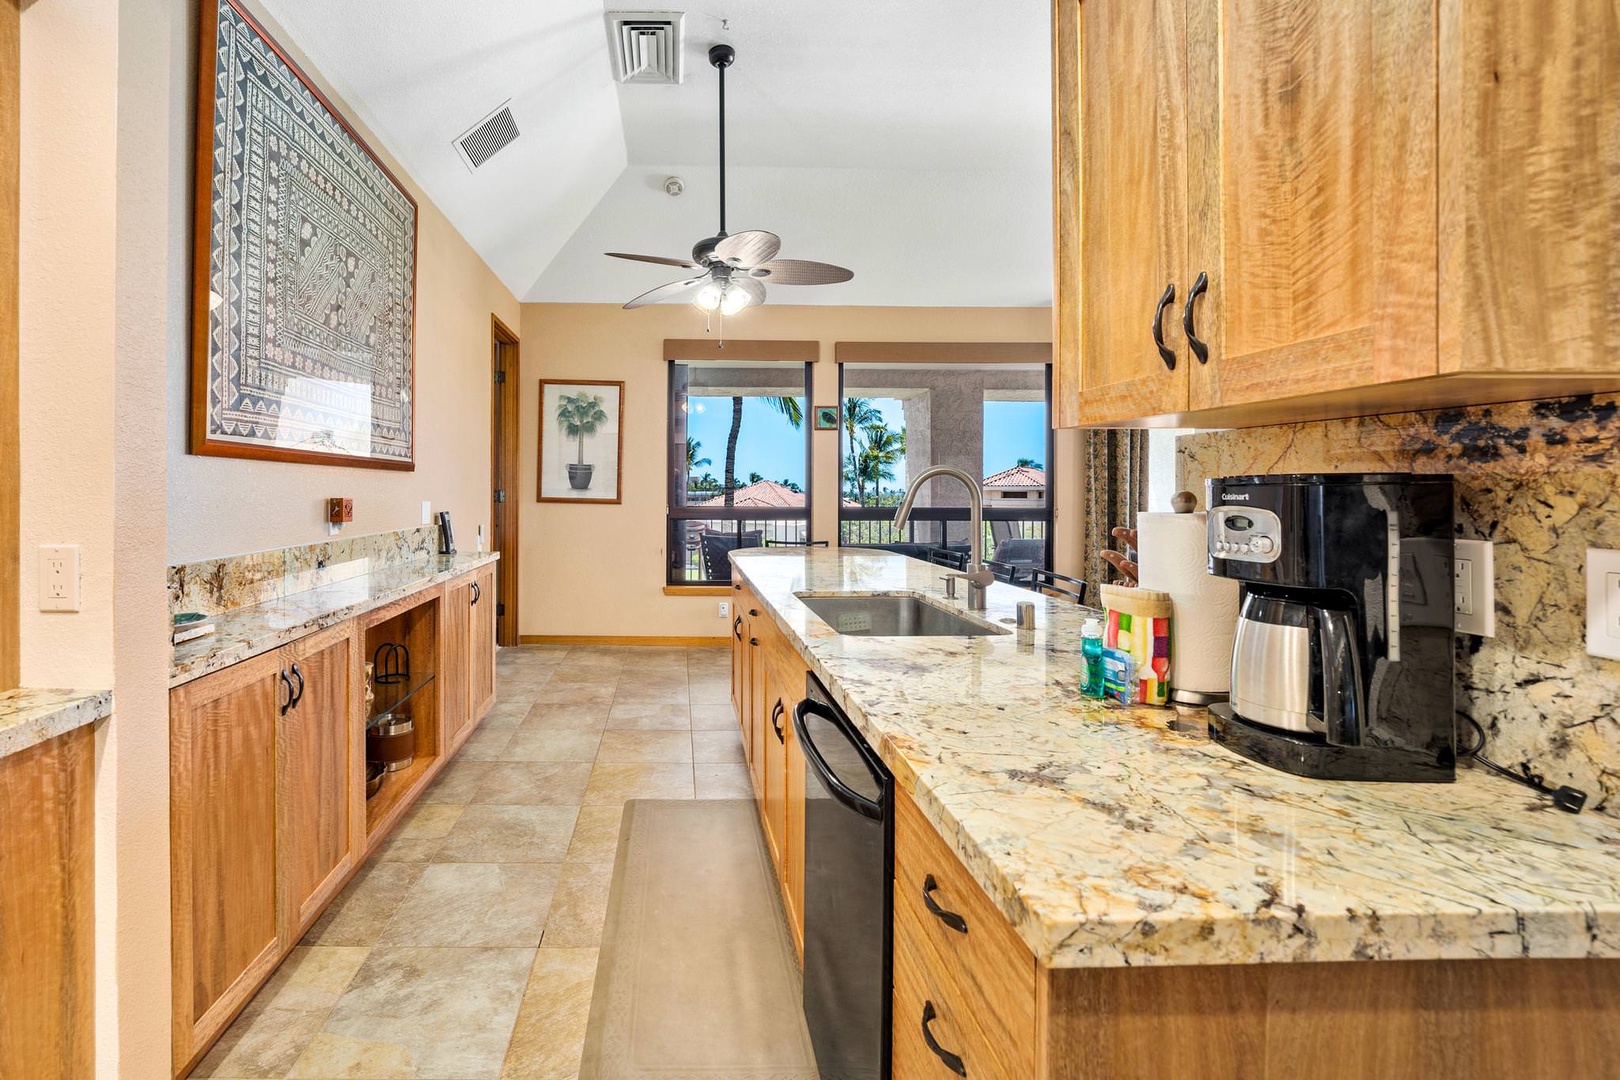 Kitchen with toaster, drip coffee maker, dishwasher and more